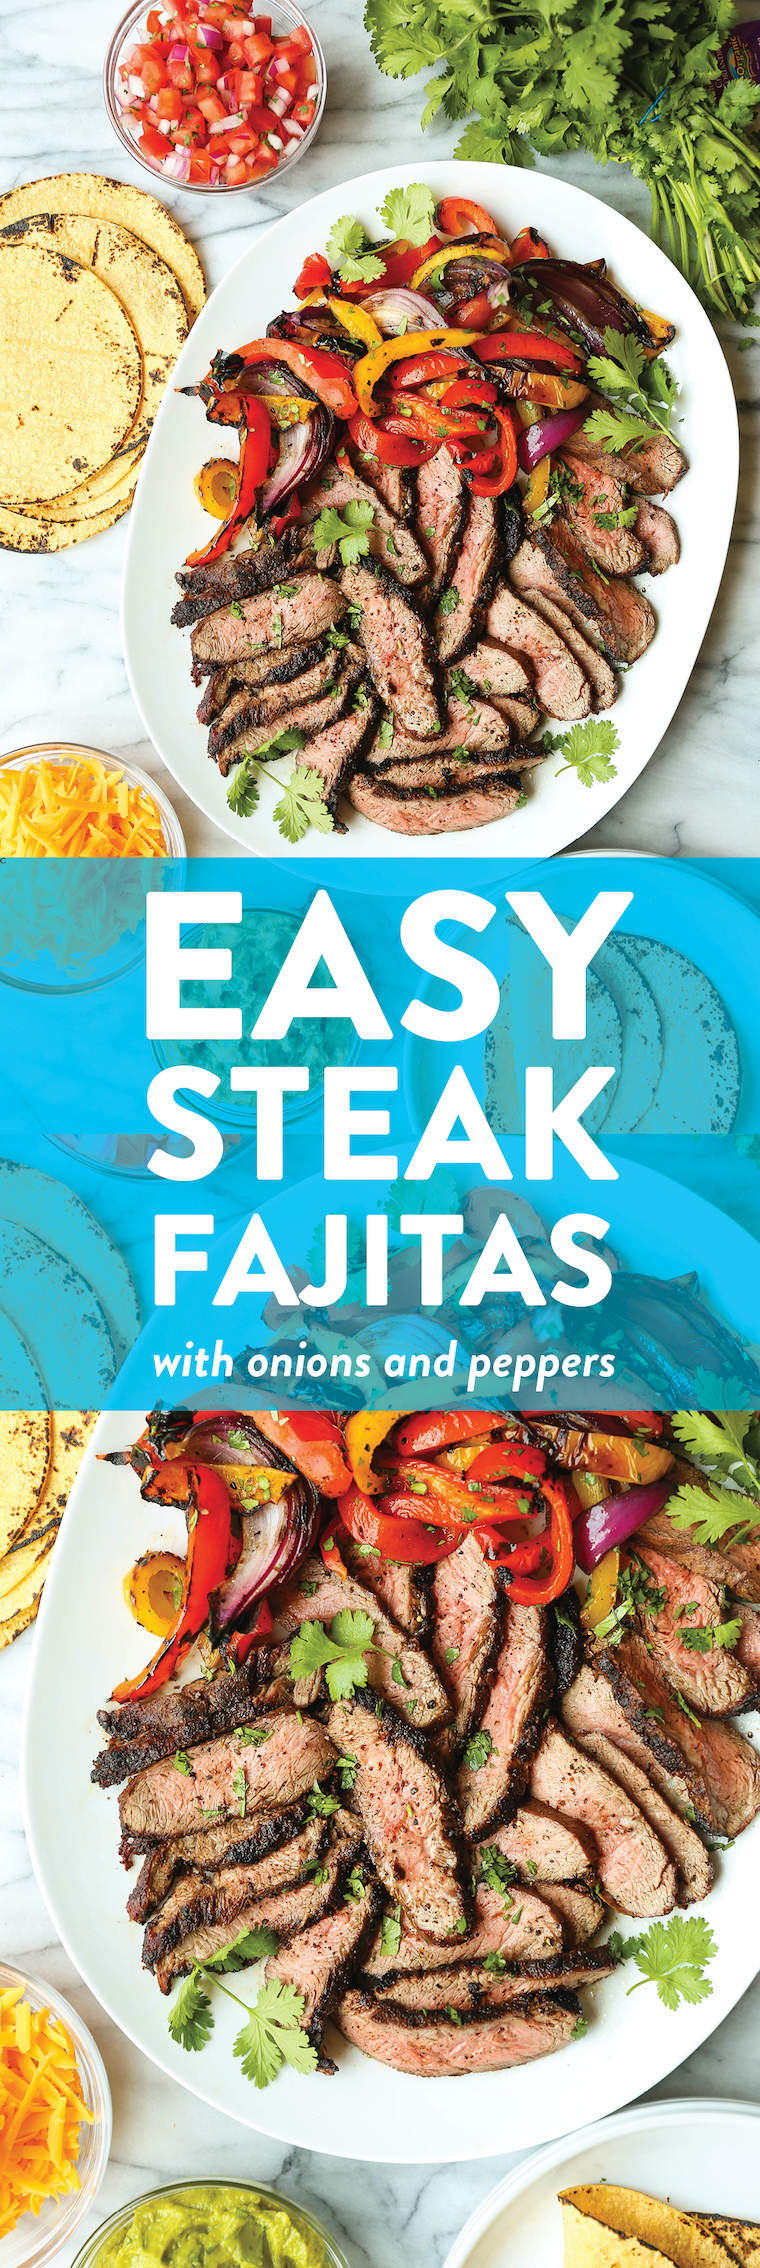 Easy Steak Fajitas - Tender, juicy, melt-in-your-mouth slices of steak with bell peppers and onion. SO SO GOOD. Serve with tortillas, pico and guacamole.